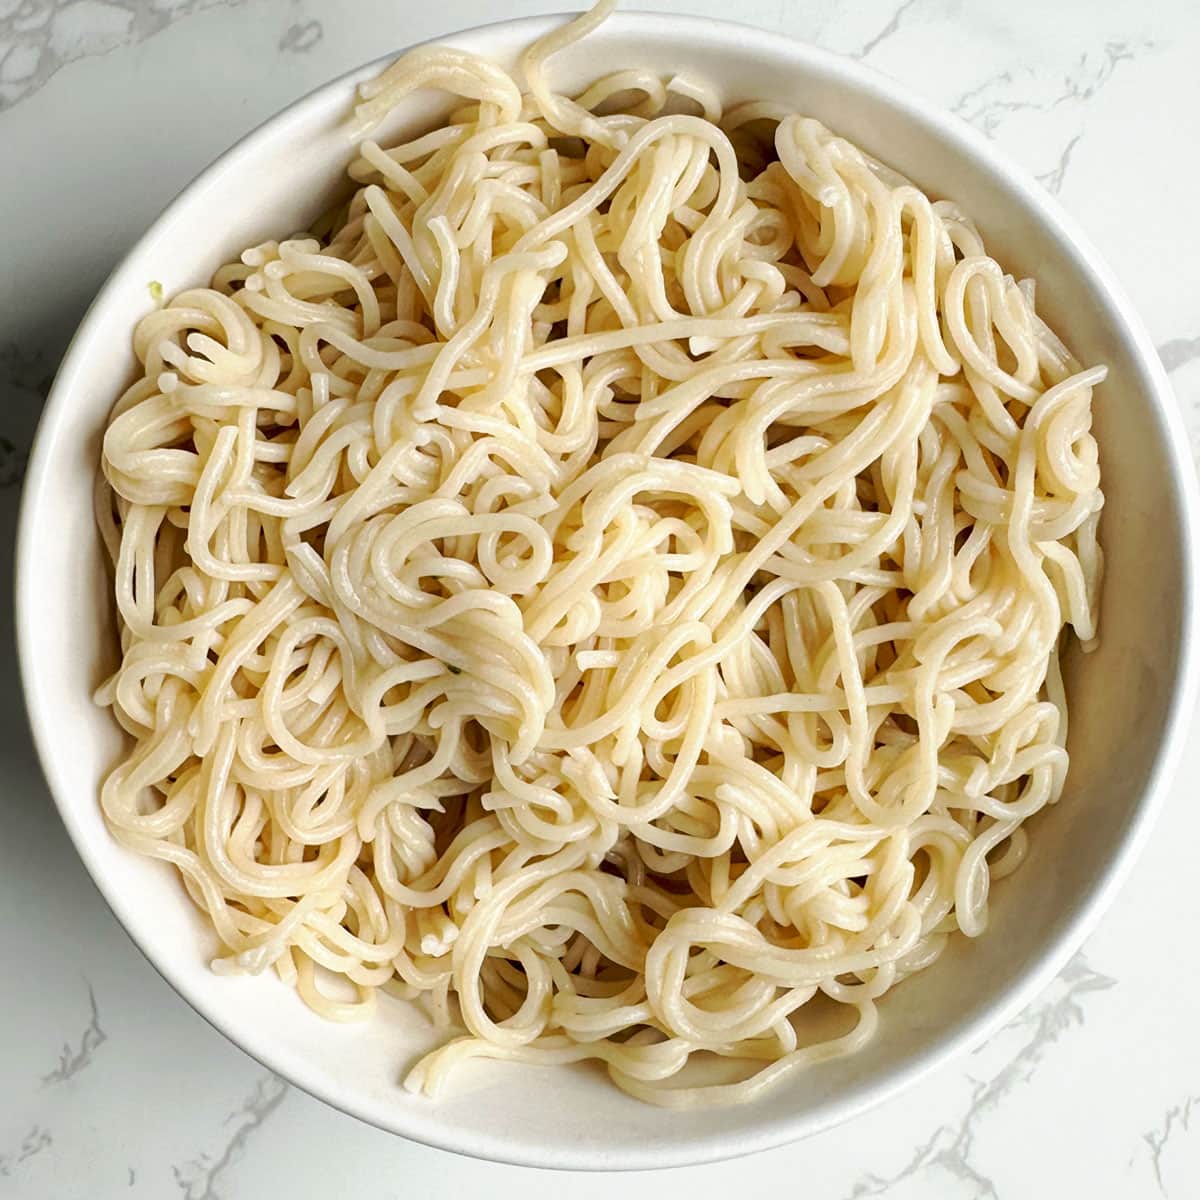 Boiled and strained noodles in a bowl.